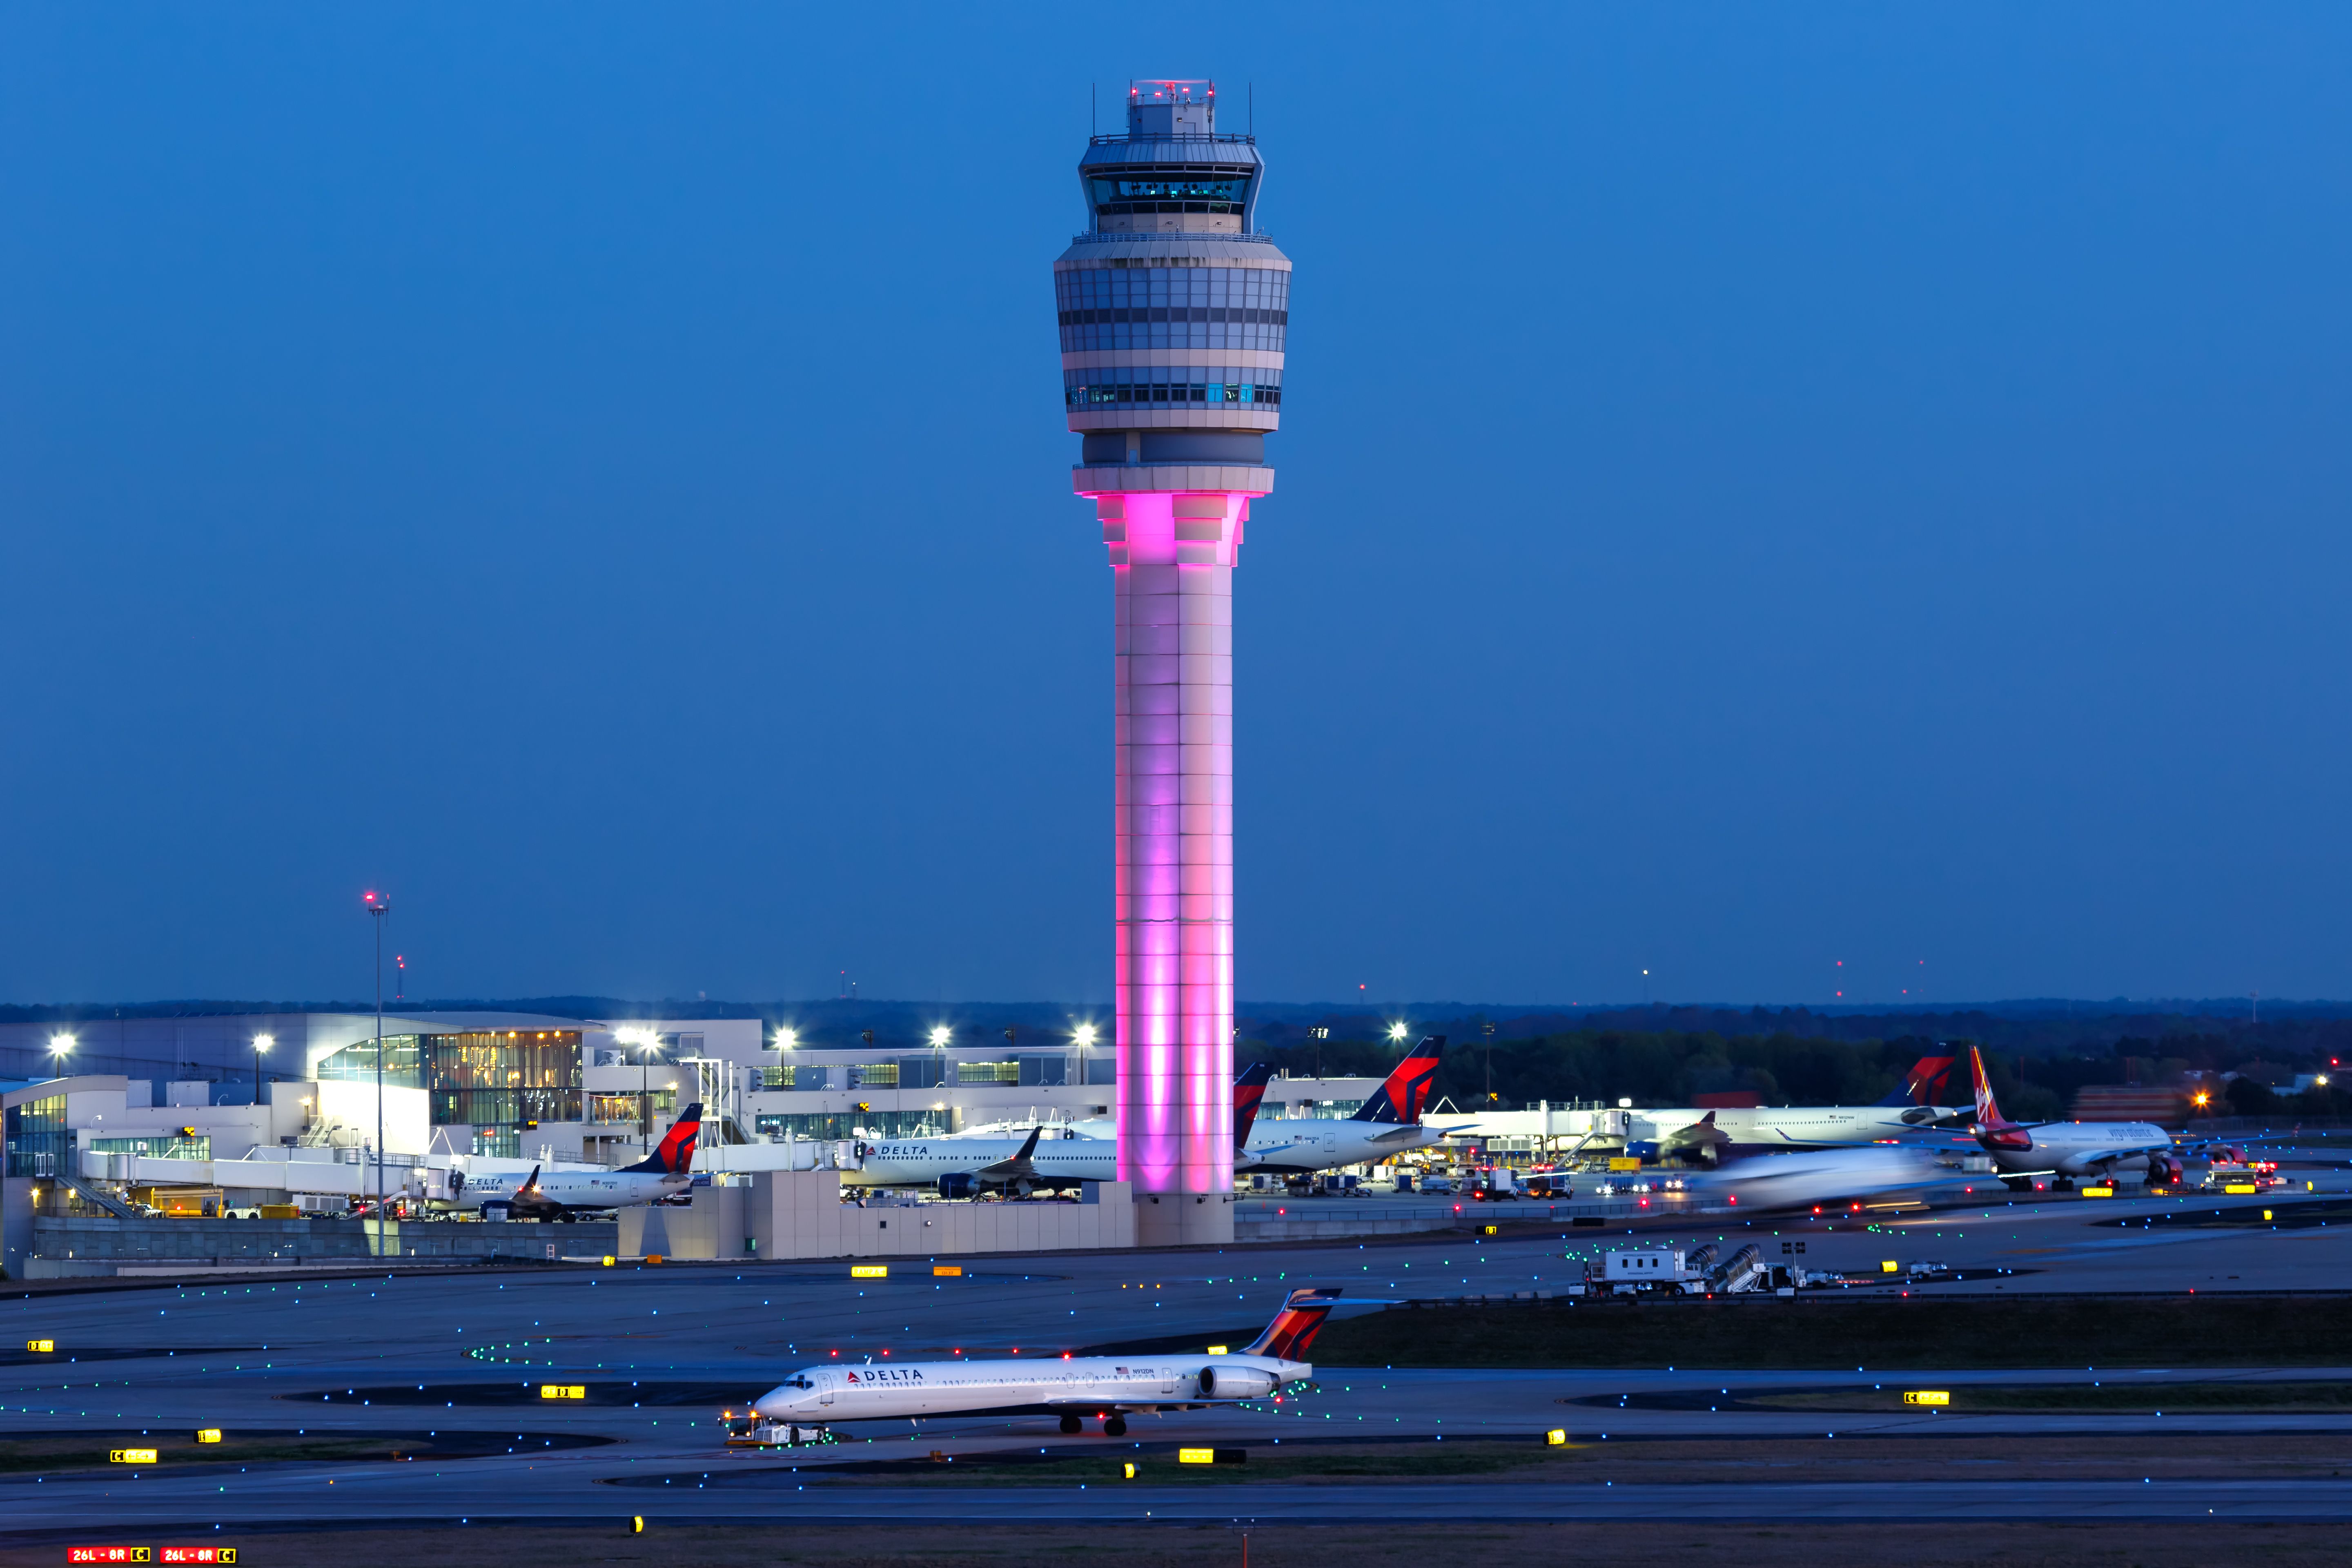 How Can Airports Lead The Industry’s Decarbonization?